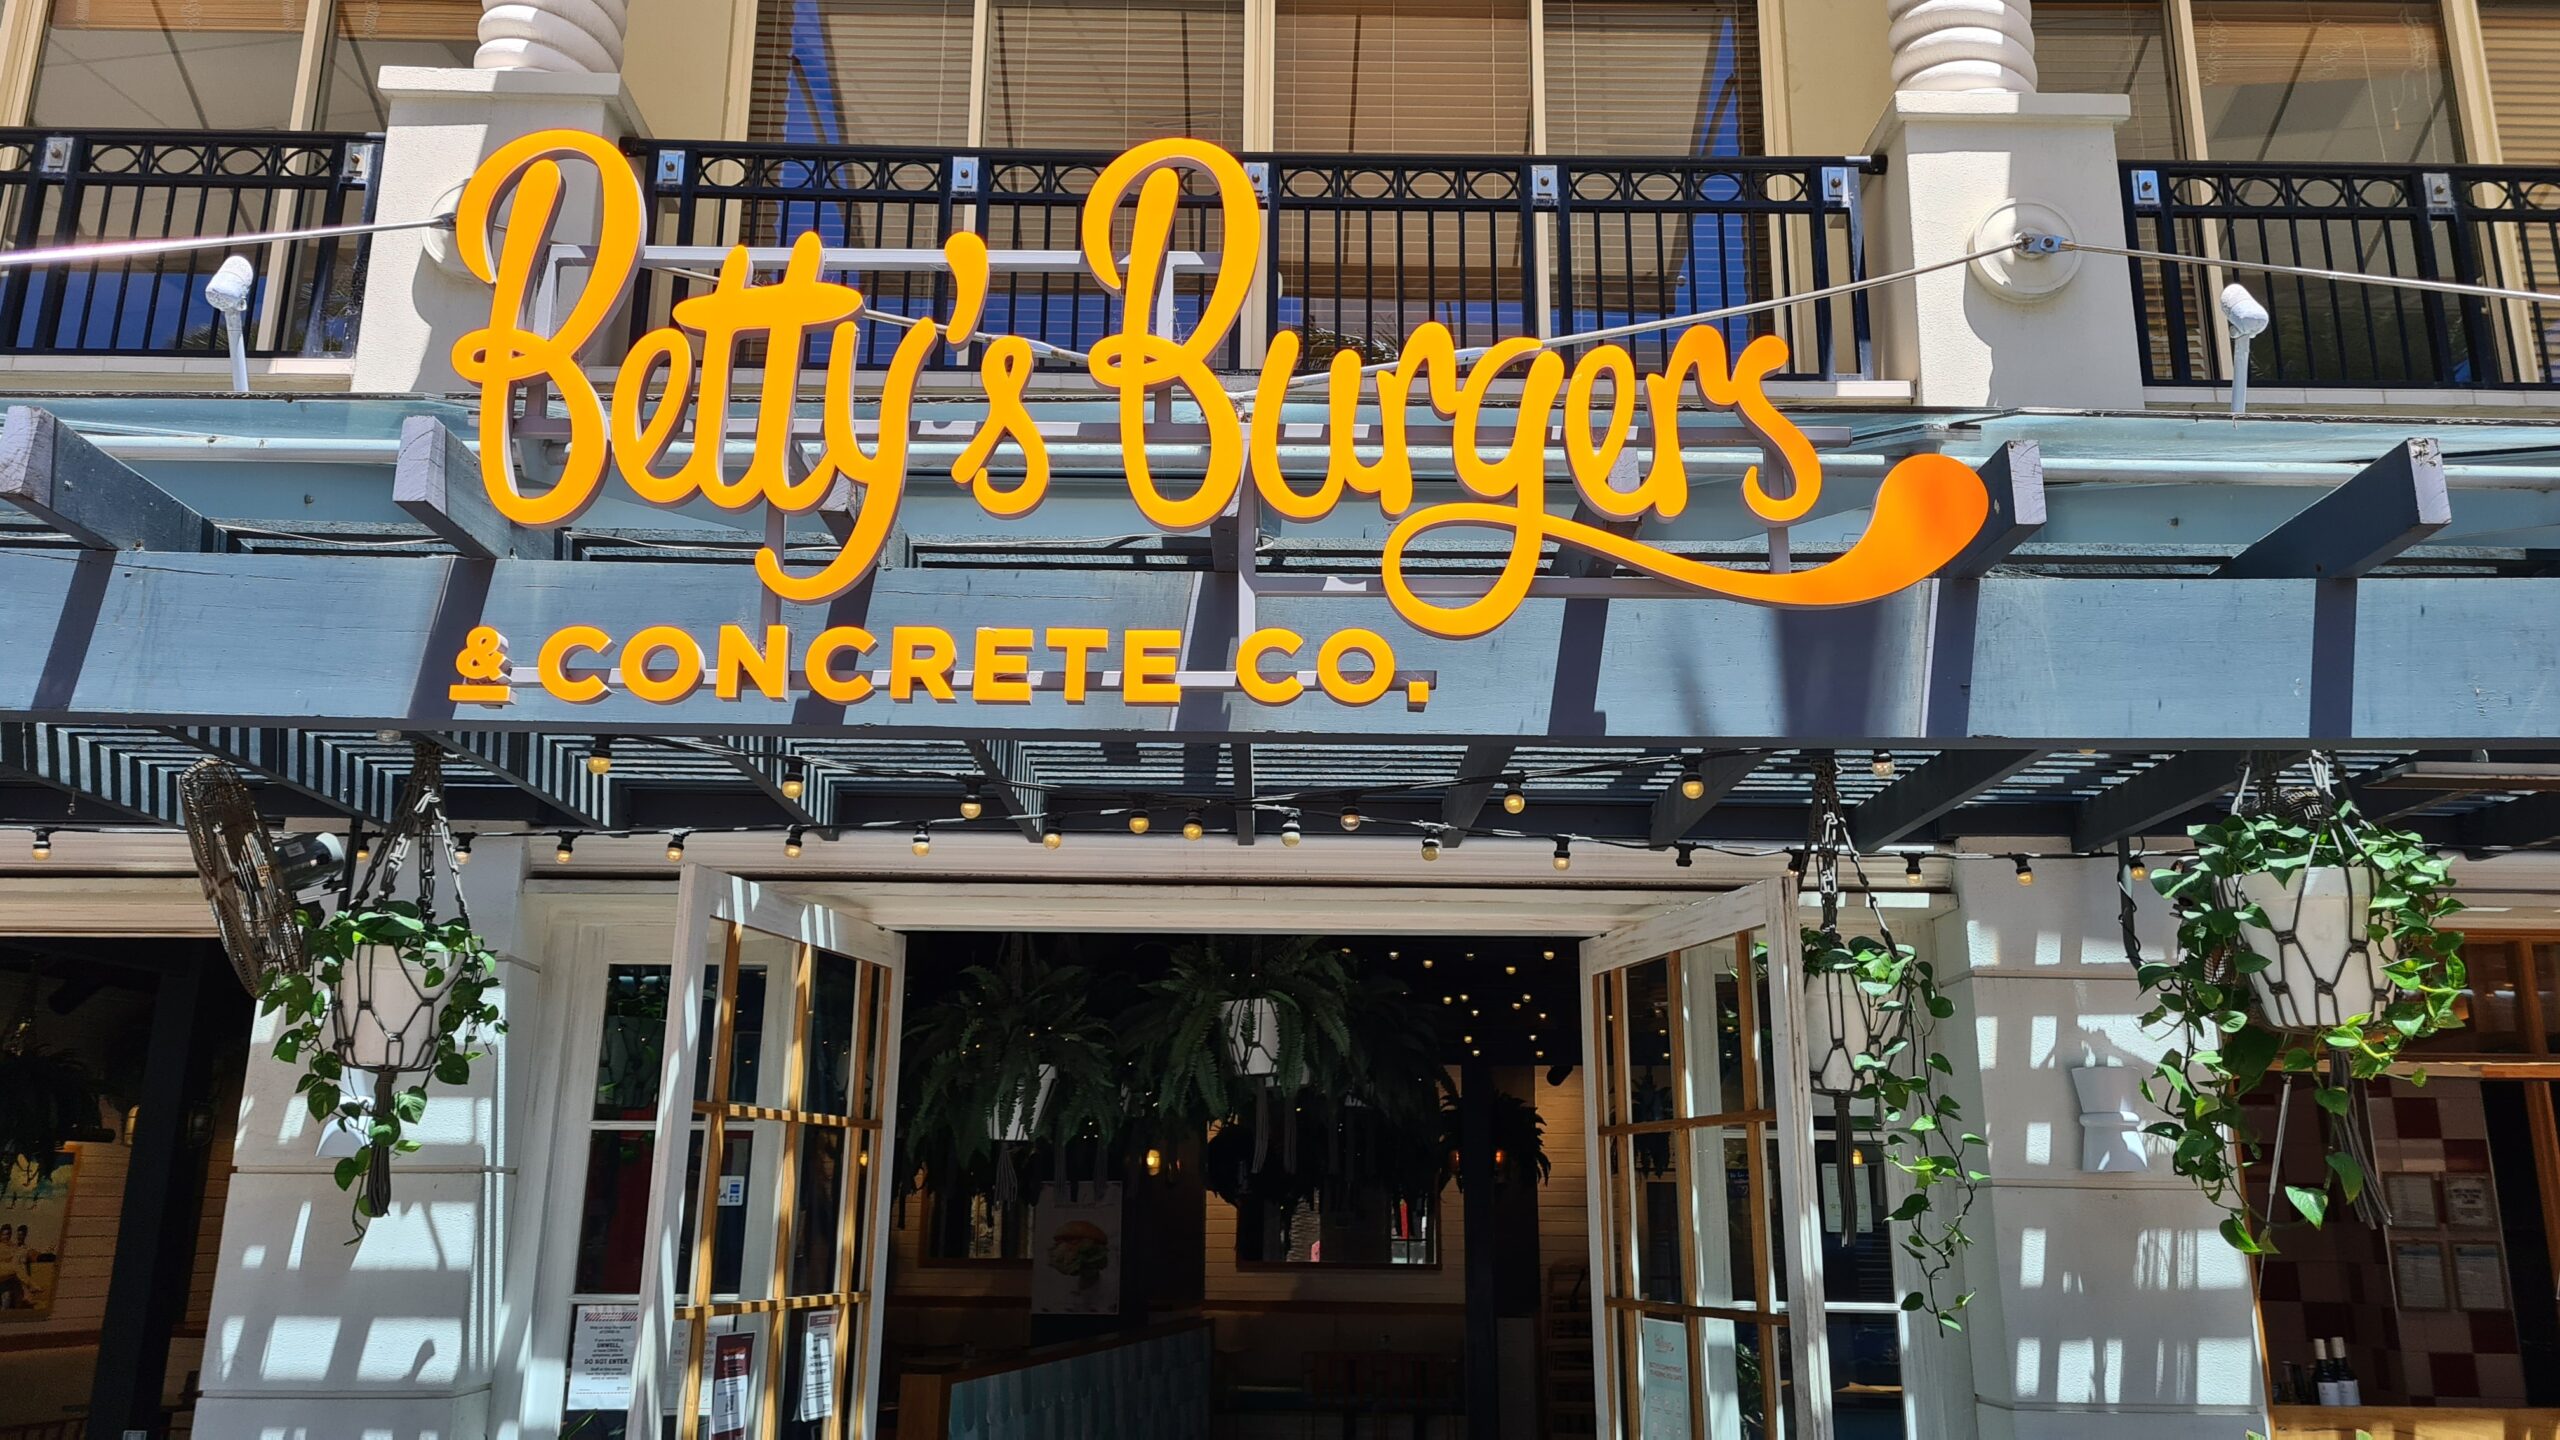 Bright neon sign displaying "betty's burgers & concrete co." co-branding hung on a blue storefront with hanging green plants and an open entrance.